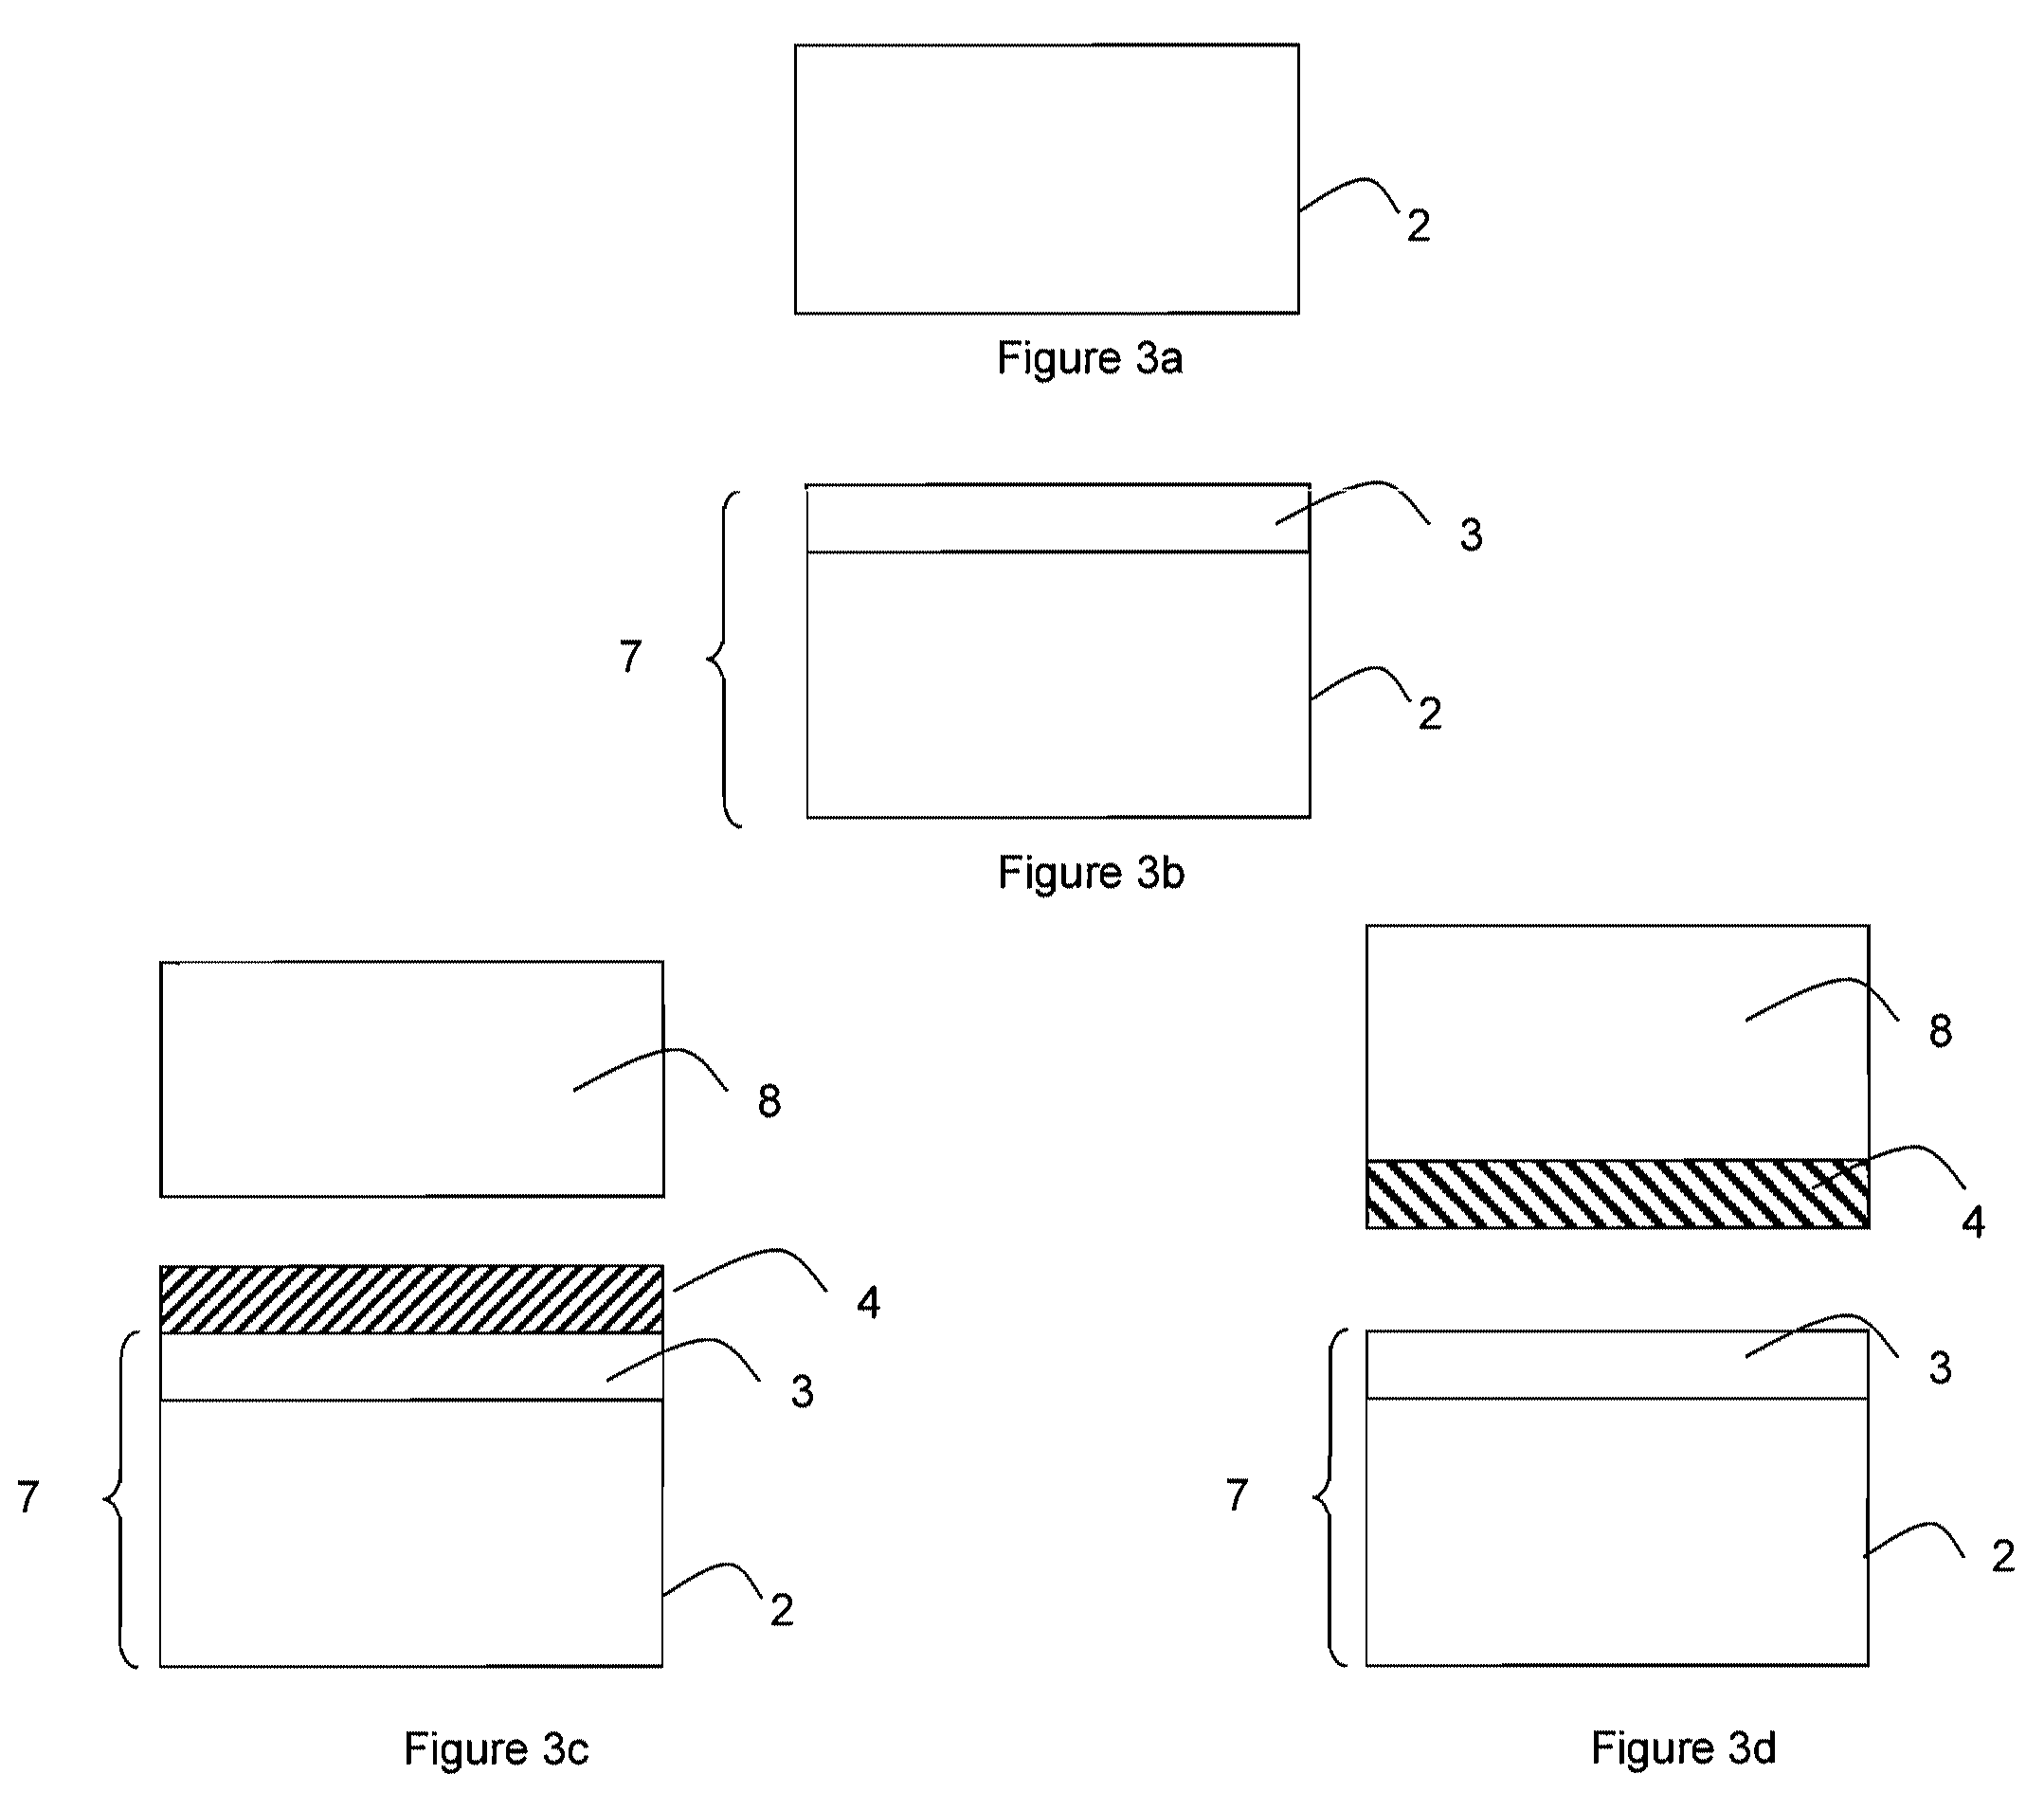 Low-cost substrates having high-resistivity properties and methods for their manufacture